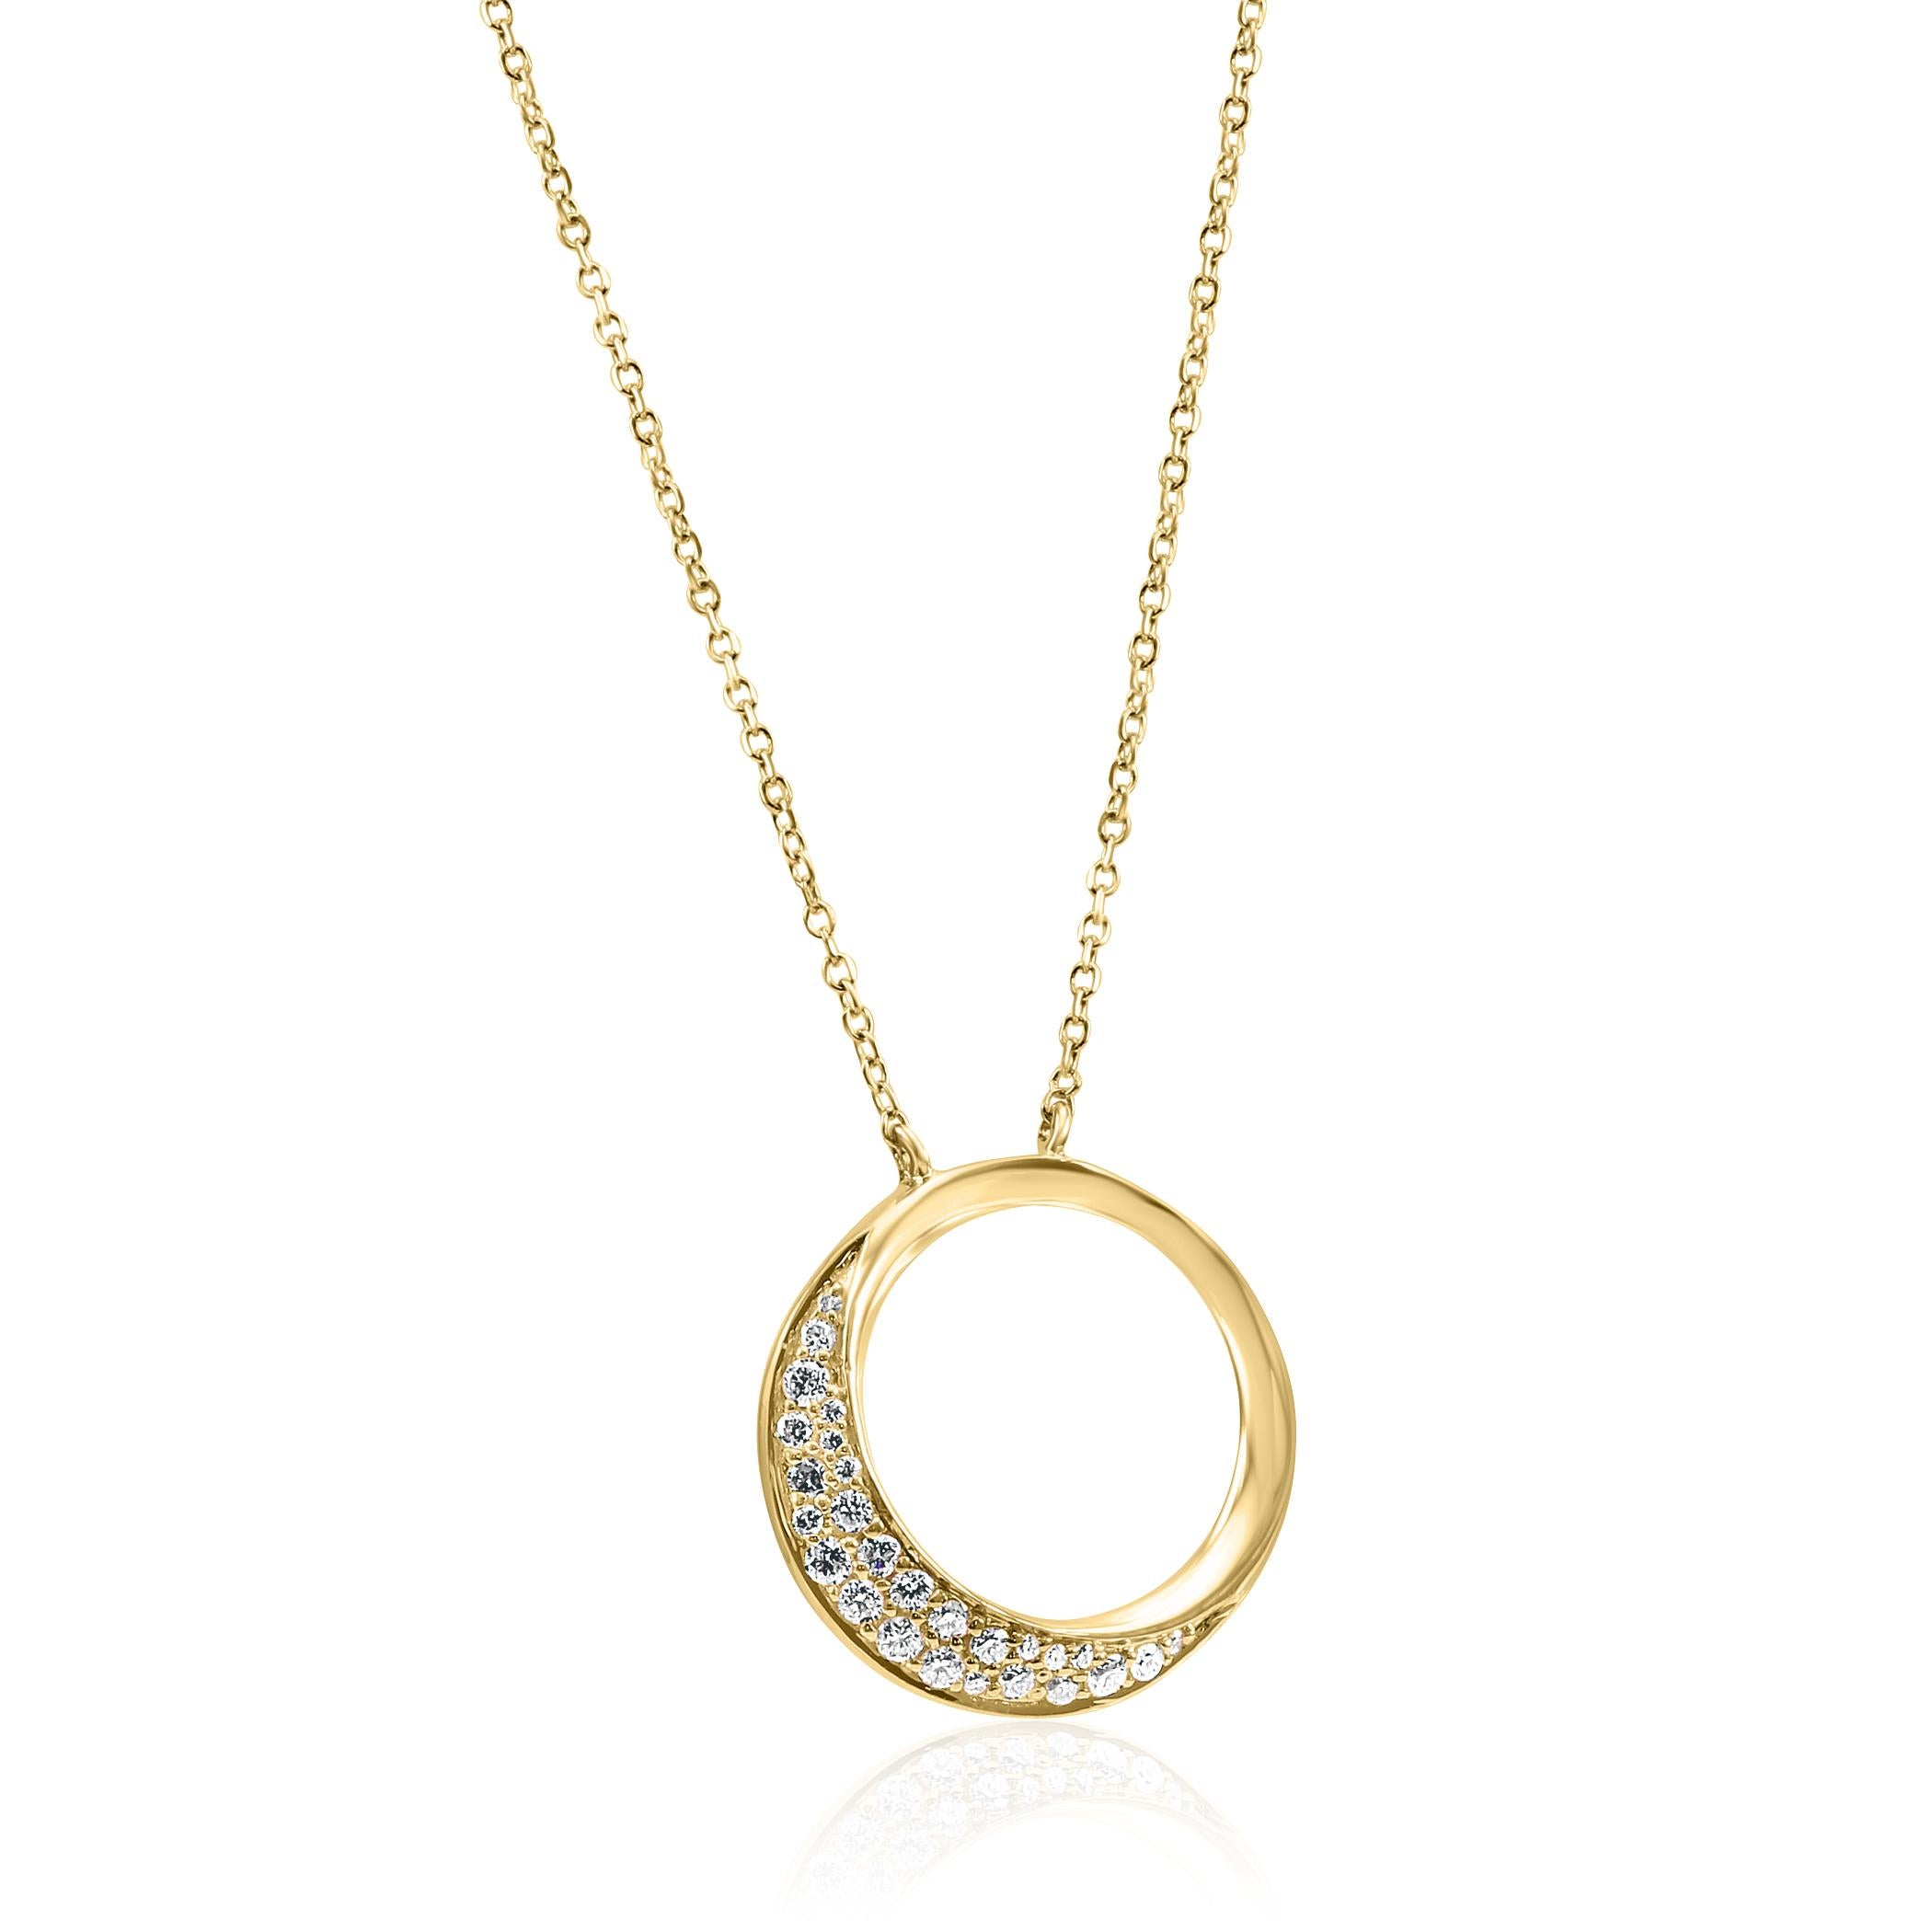 Embrace the eternal beauty of life with our Circle of Life pendant chain necklace.

The Circle of Life pendant represents the unending journey of existence and the everlasting bond that connects us all. Crafted from lustrous 14K yellow gold, this